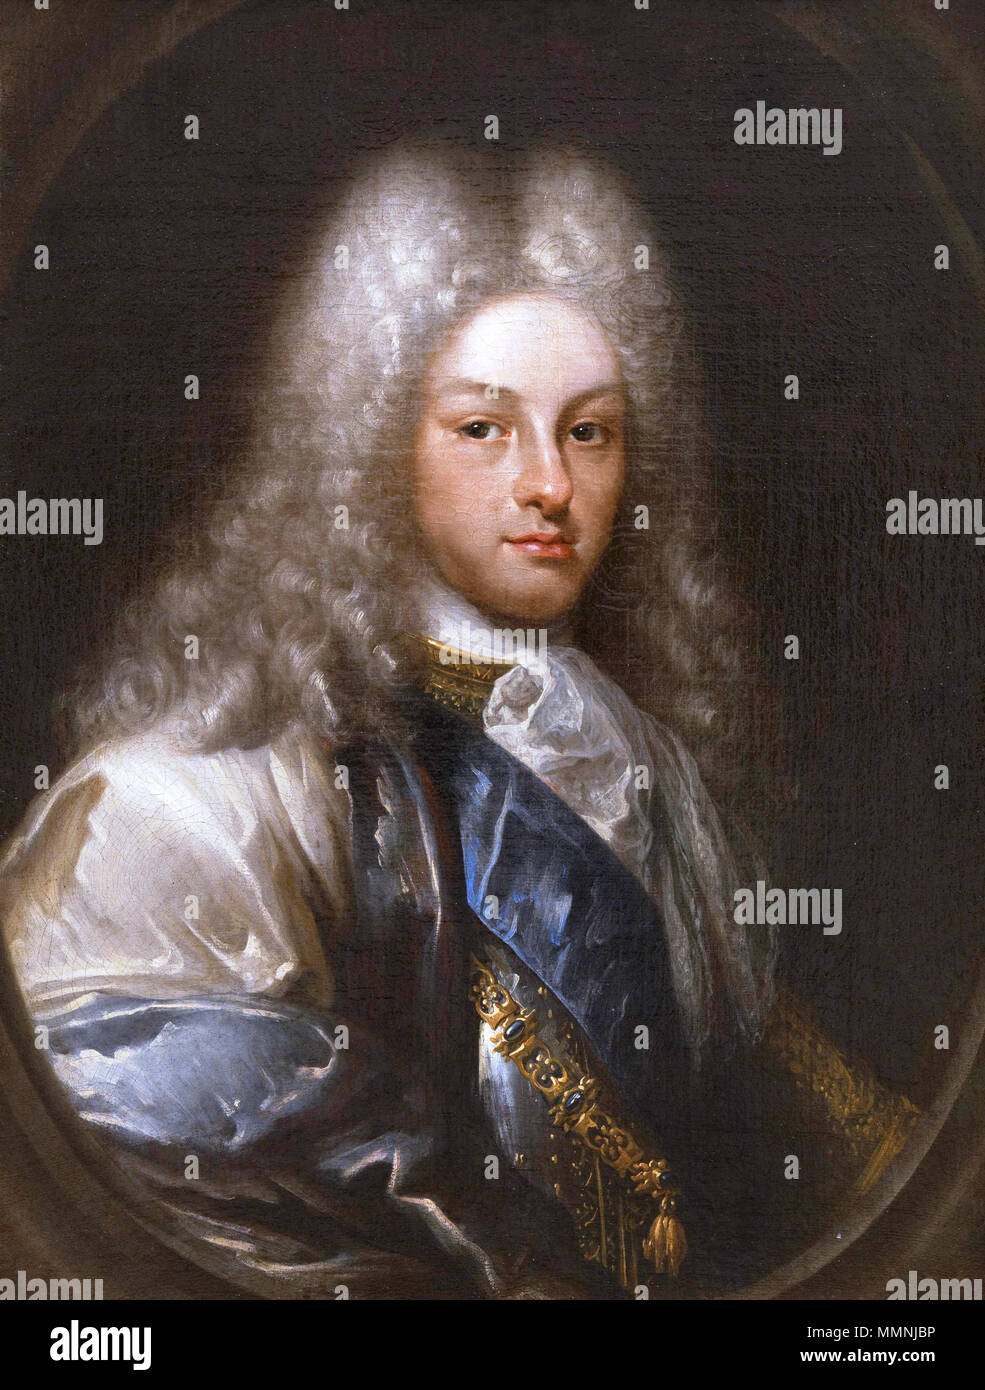 . Philip V of Spain (19 December 1683 - 9 July 1746), born Philippe de France, fils de France and duc d'Anjou, was king of Spain from 1700 to 1724 and from 1724 to 1746, the first of the Bourbon dynasty in Spain. Philip was the second son of Louis, le Grand Dauphin and Maria Anna of Bavaria,[1] known as Dauphine Victoire. He was a younger brother of Louis, duc de Bourgogne and an uncle of Louis XV of France.  Felipe V de España. circa 1718-1722. Felipe V, duque de Anjou Stock Photo